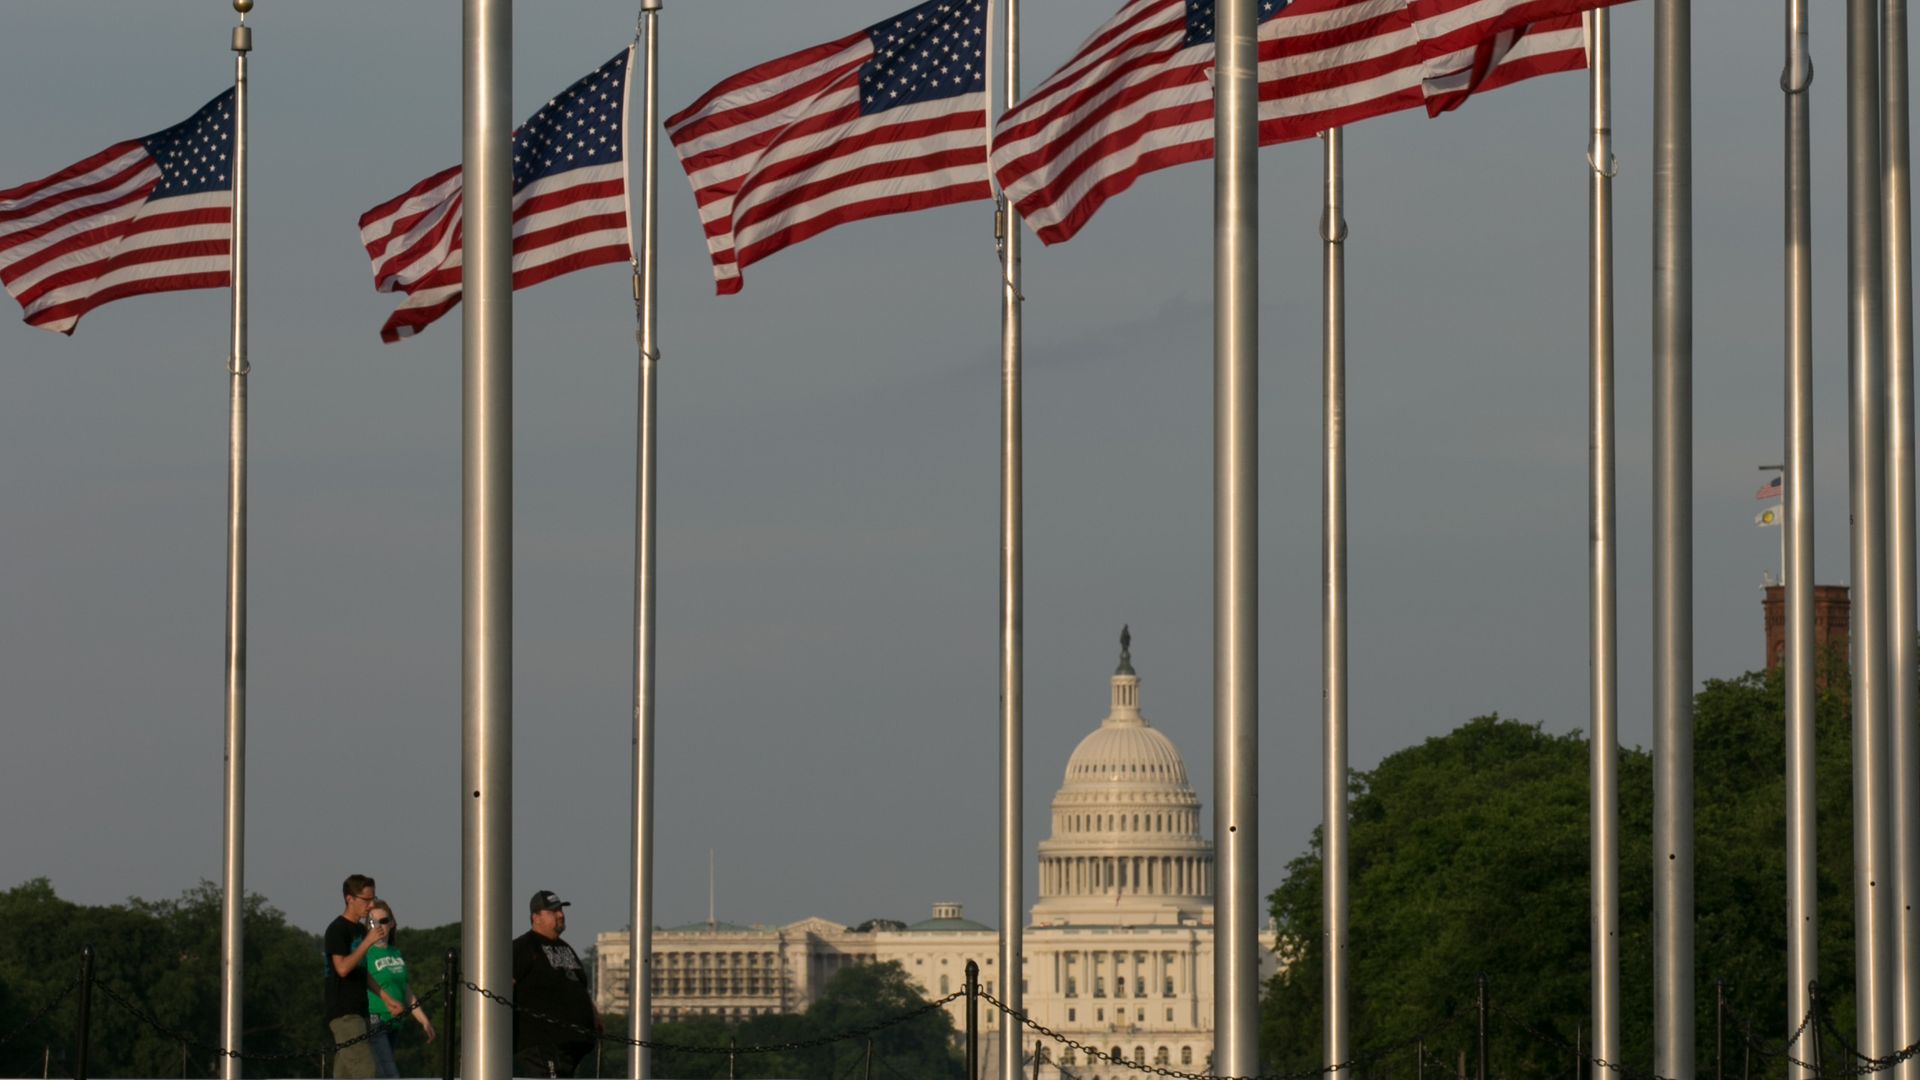 American flags on poles in a circle, with the Capitol Dome in the background